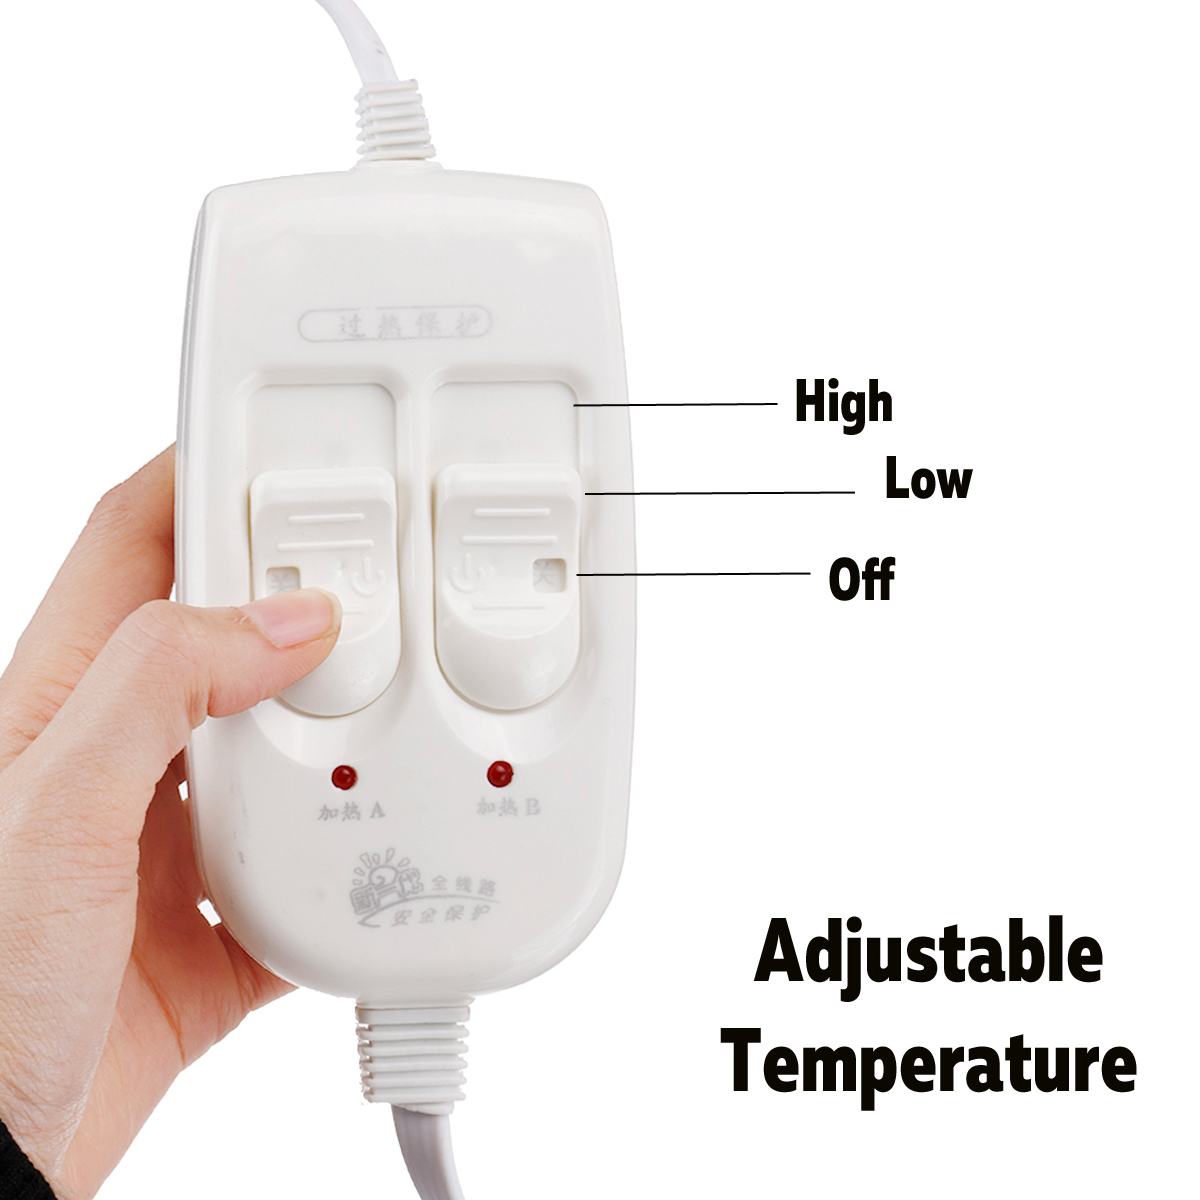 150x180cm 220V Home Electric Blanket Heater Double Body Warmer Heated Blanket Thermostat Electric Heating Blanket Bed Warmer Pad